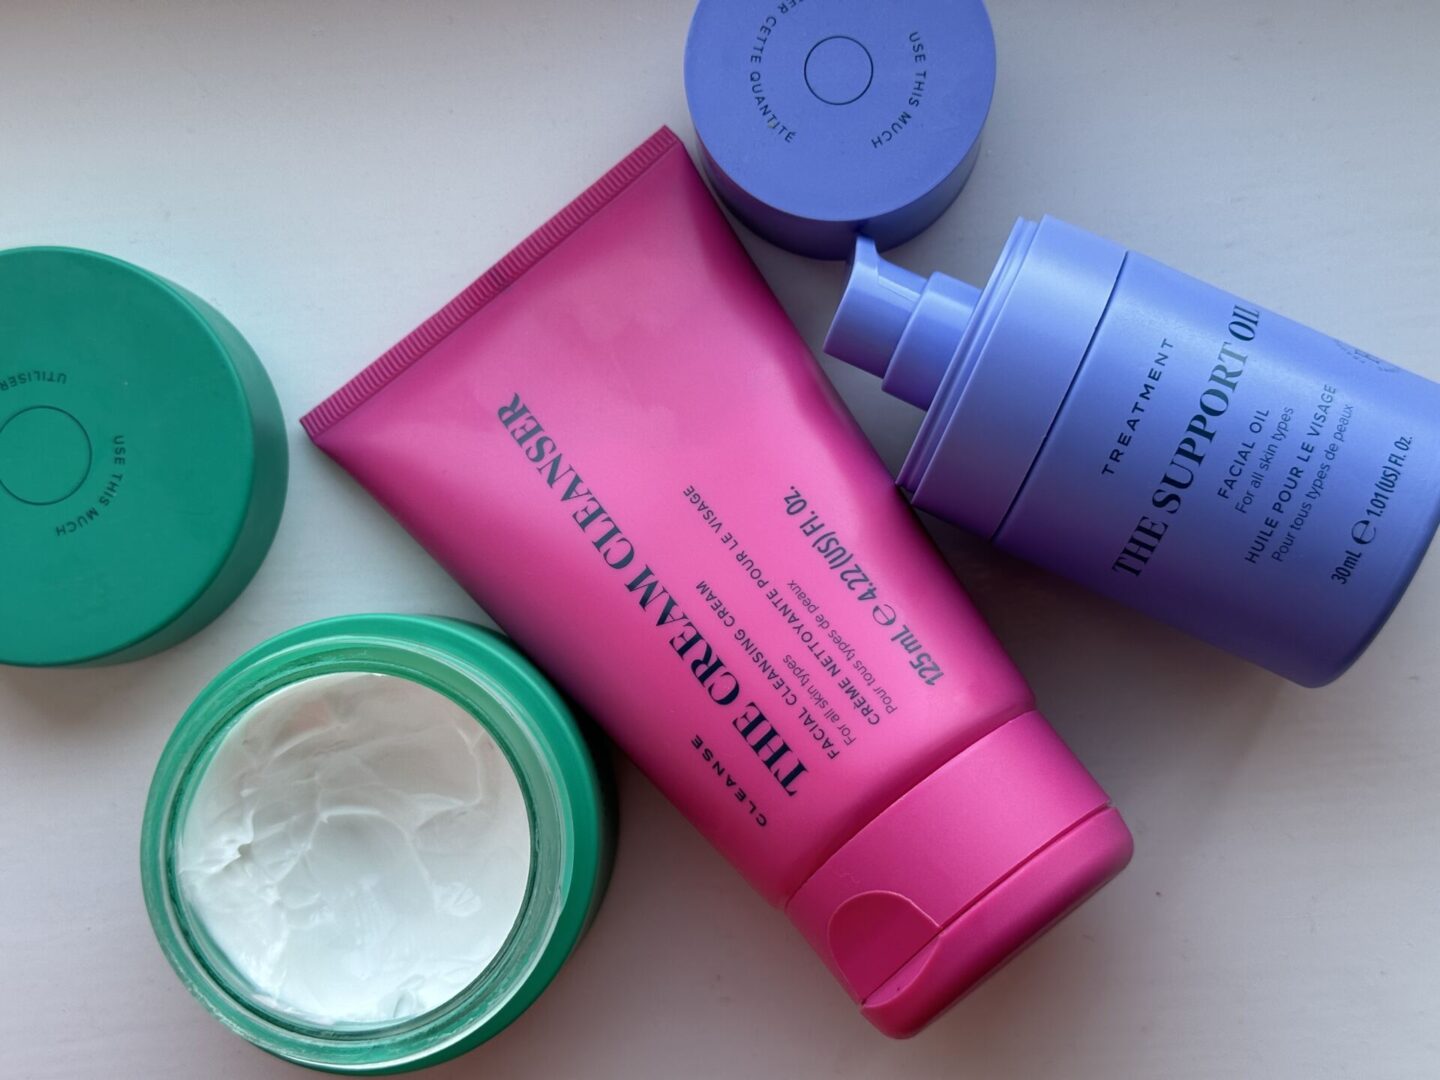 Skin Rocks The Cream Cleanser : Review.